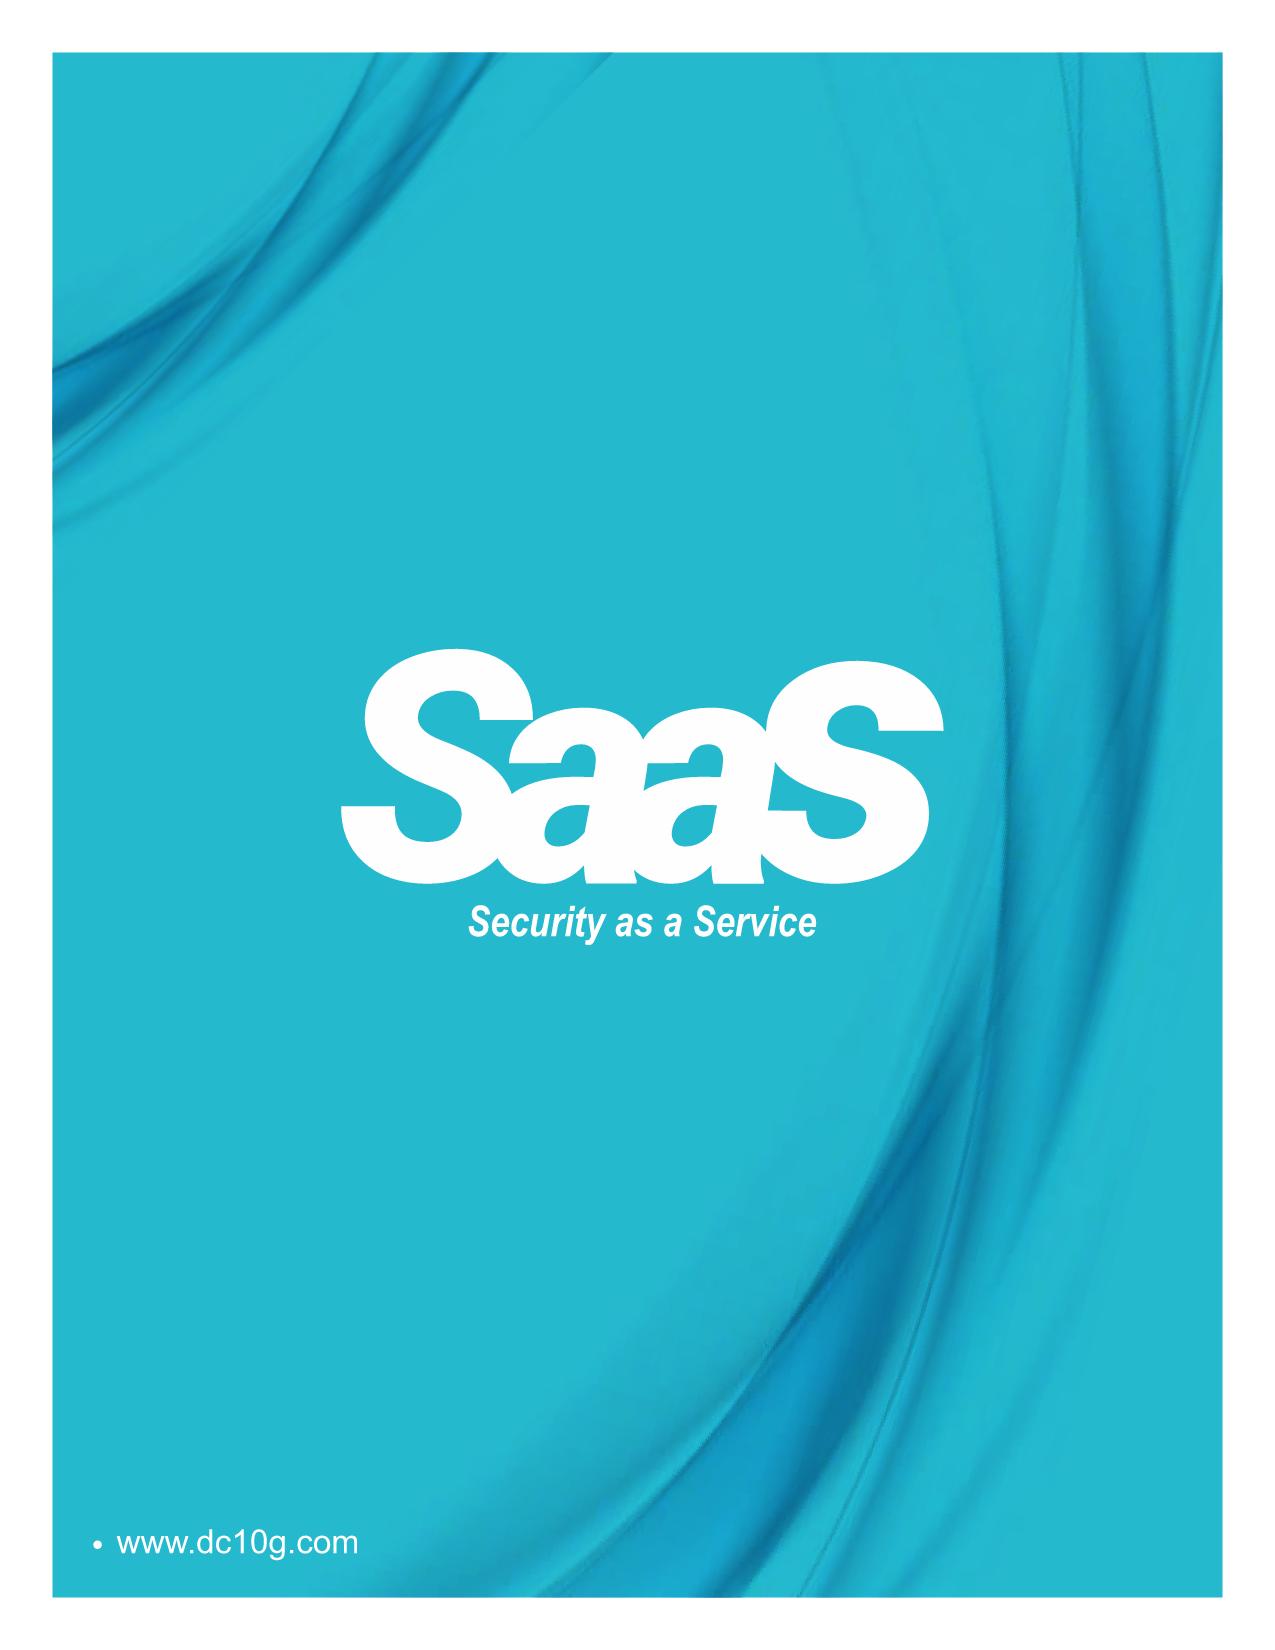 saas security as a service